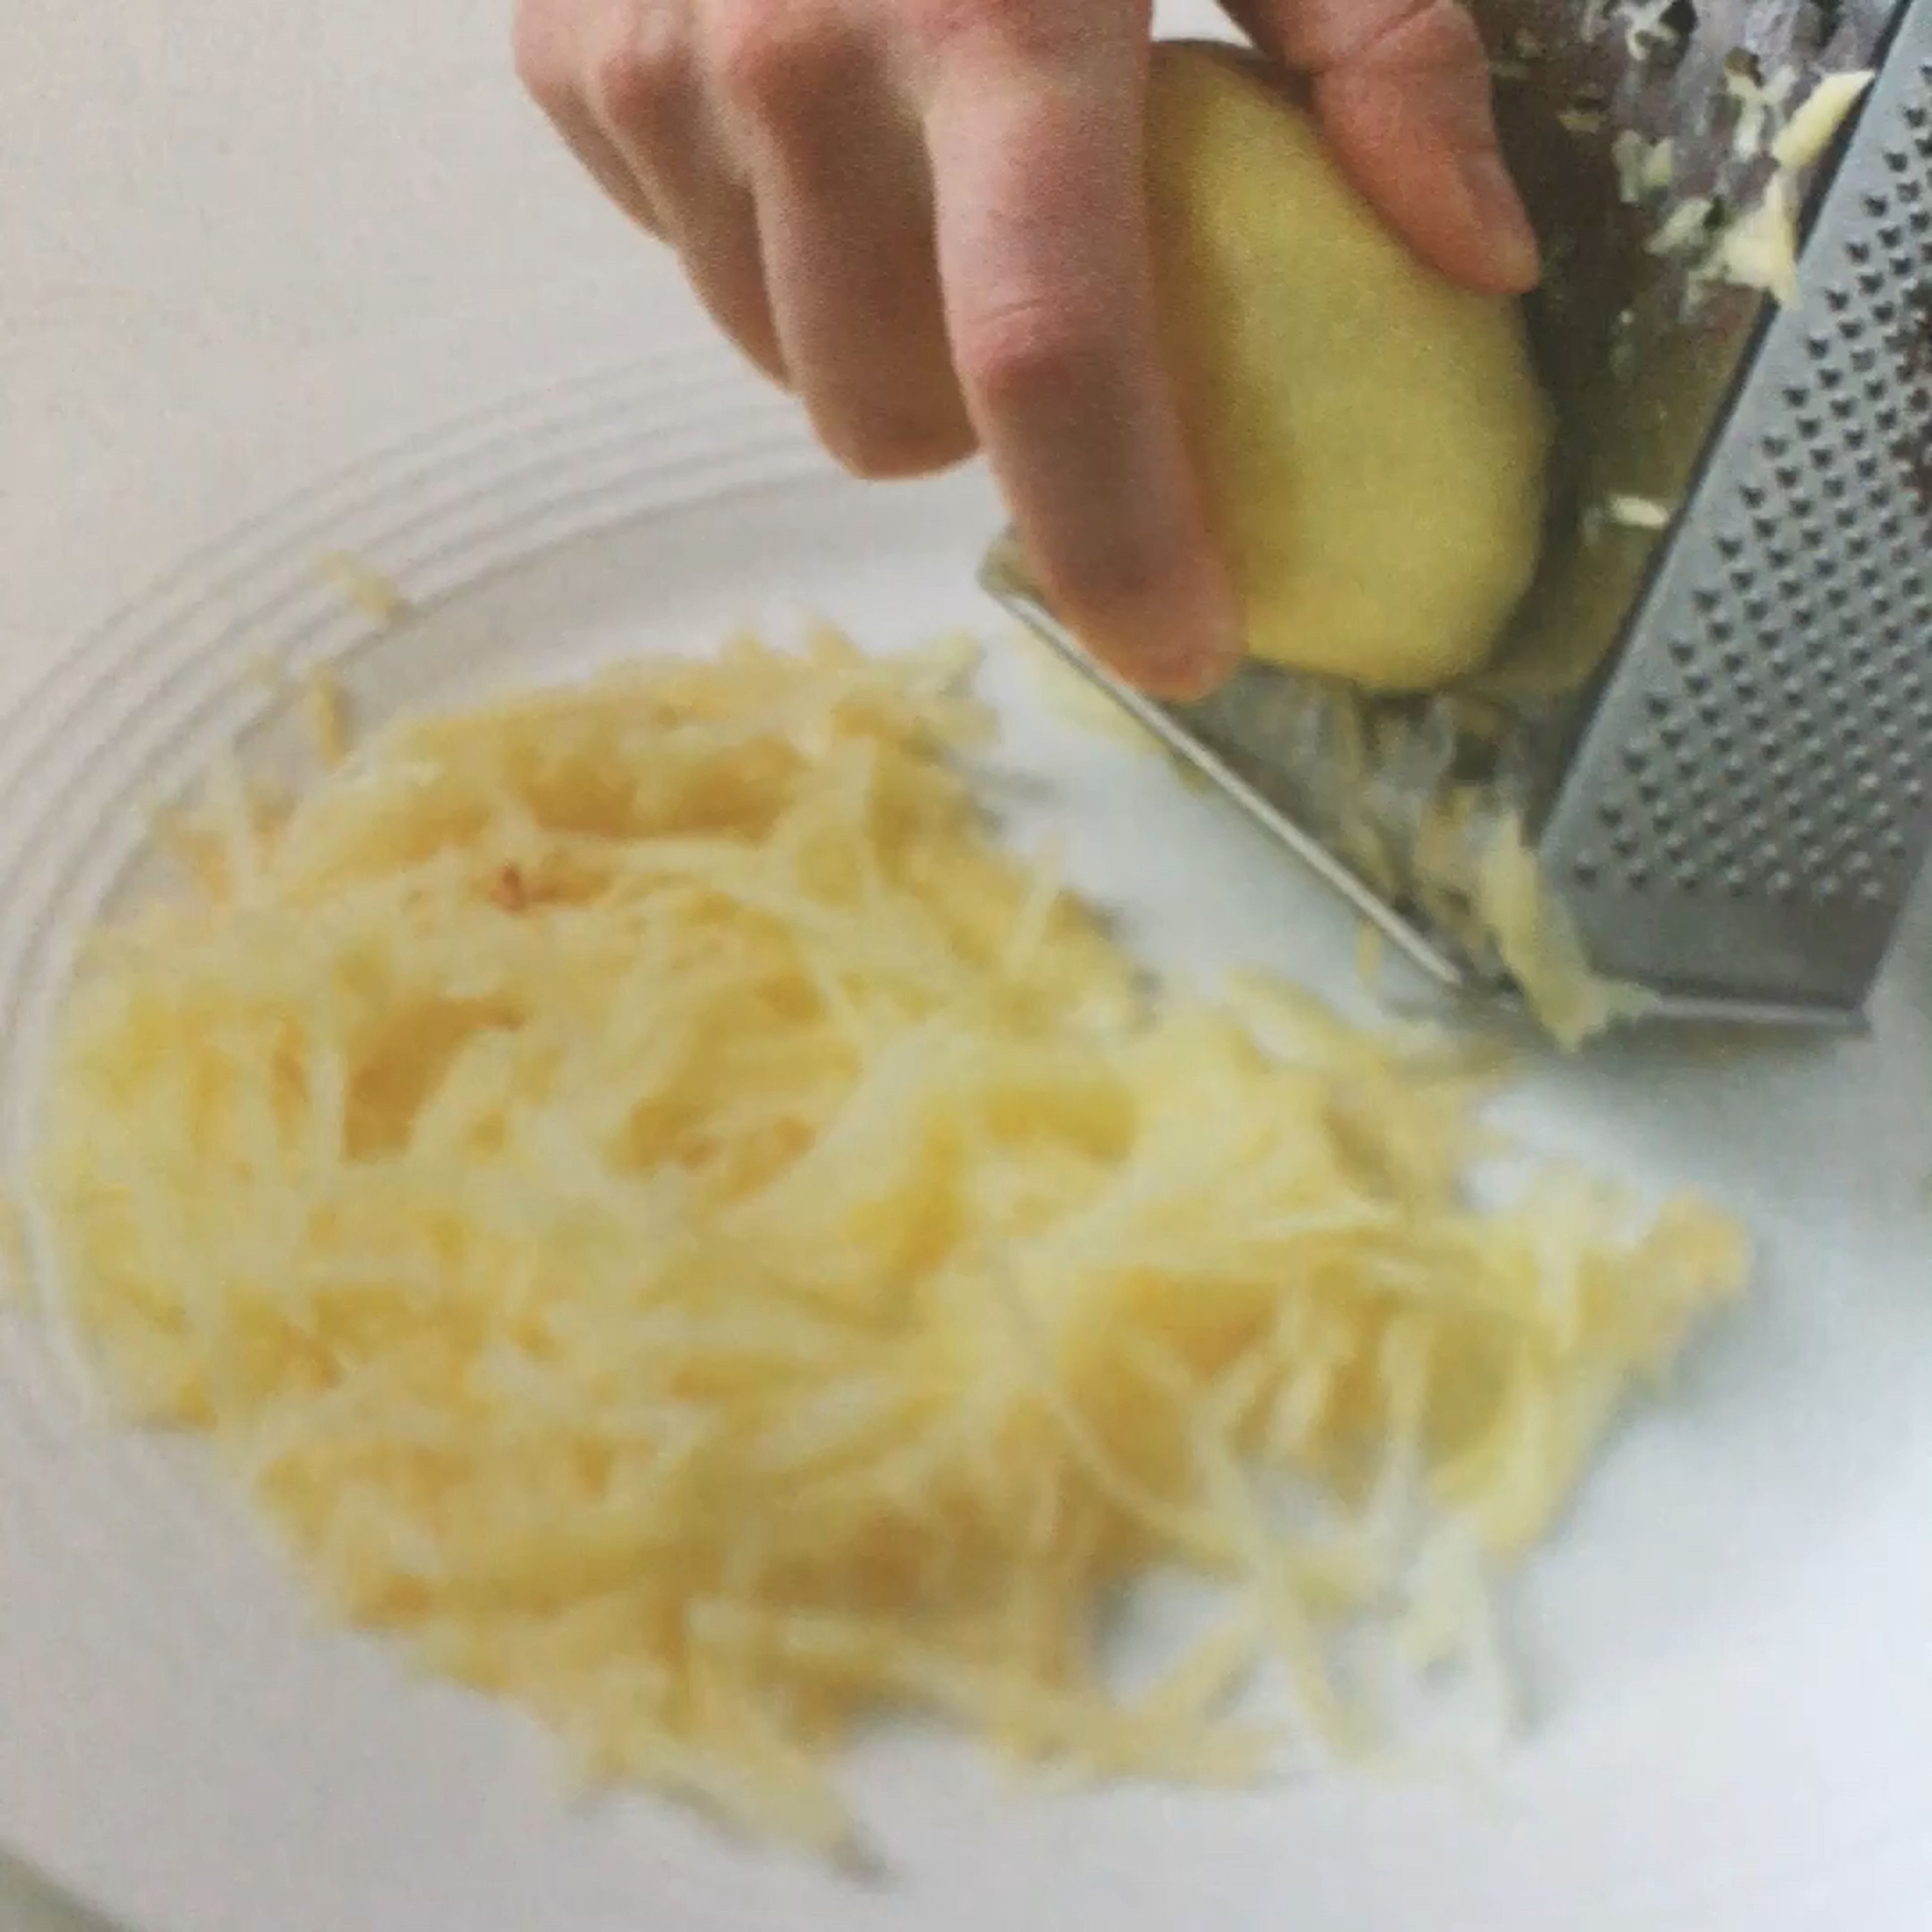 Carefully coarsely great the potatoes into a bowl or onto a plate. Transfer the potatoes on to a clean towel